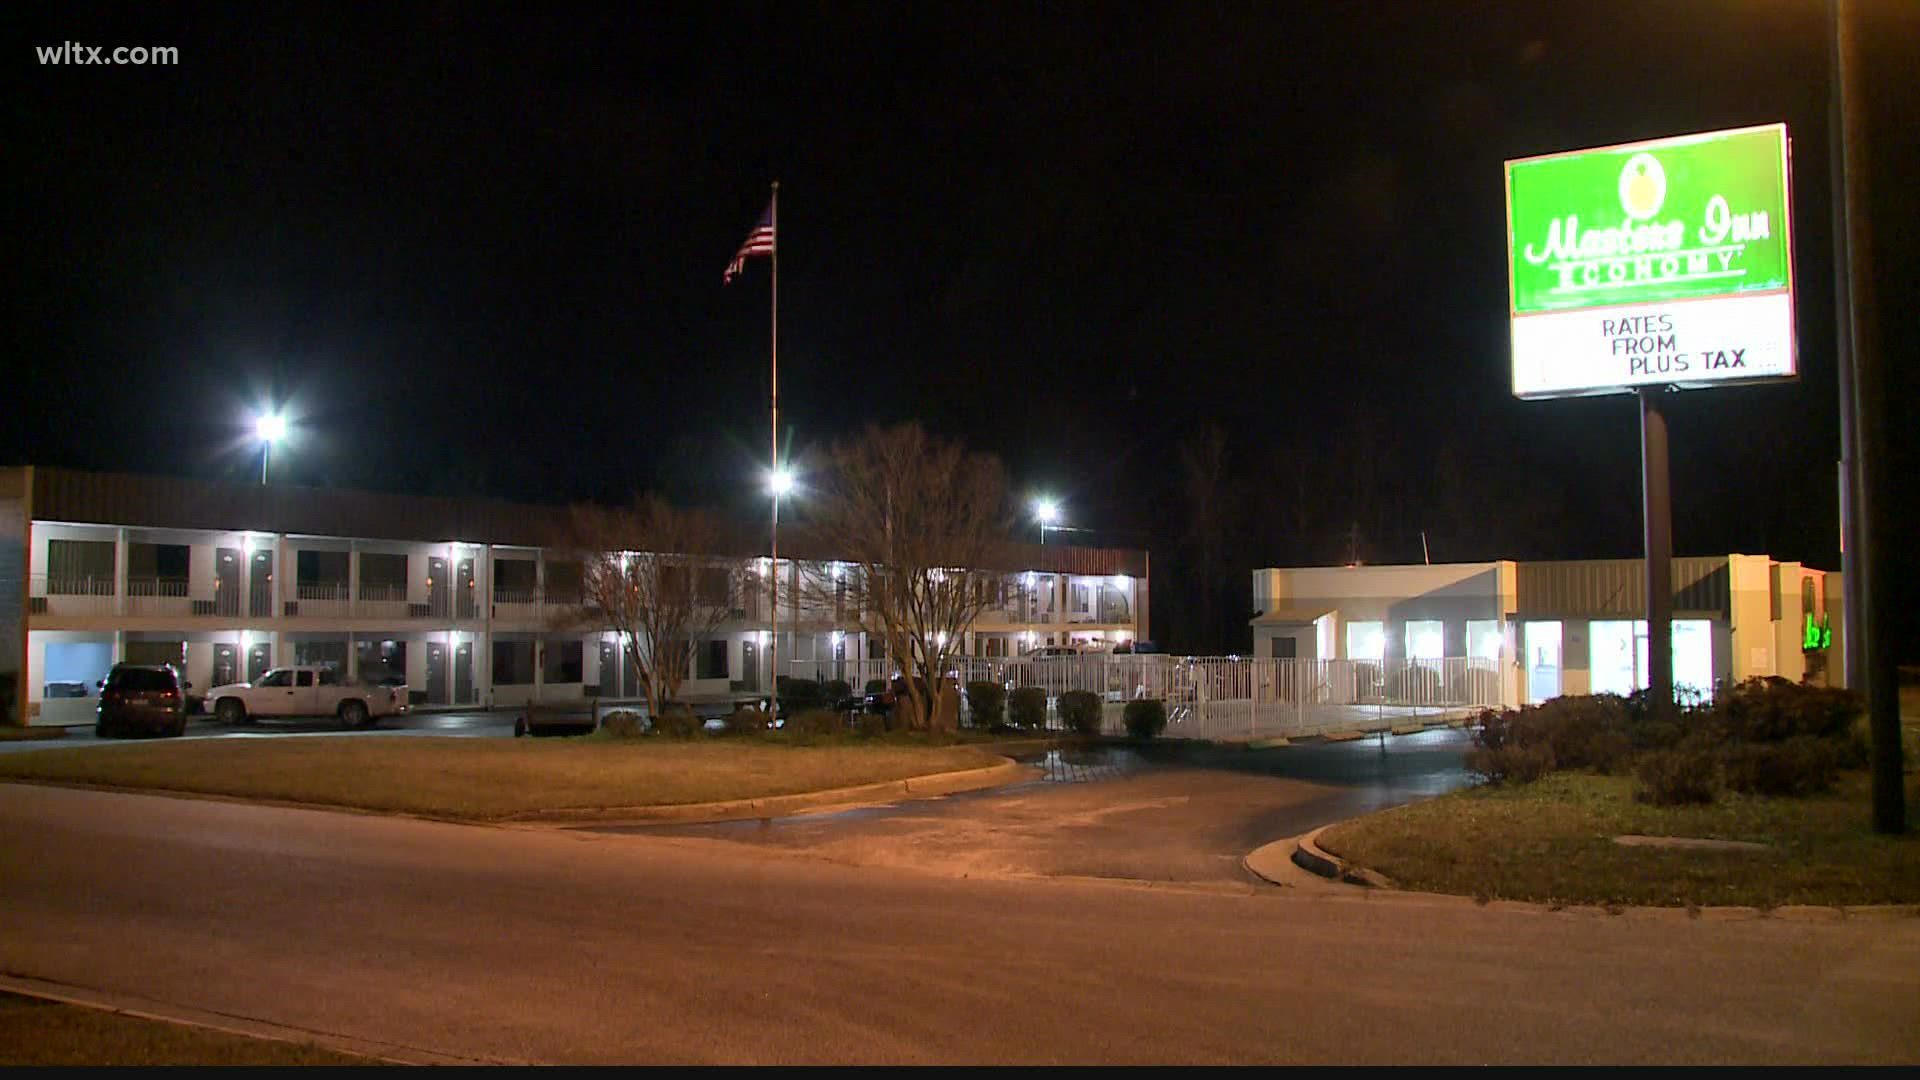 Police are investigating after a body was found Thursday at a Cayce motel.